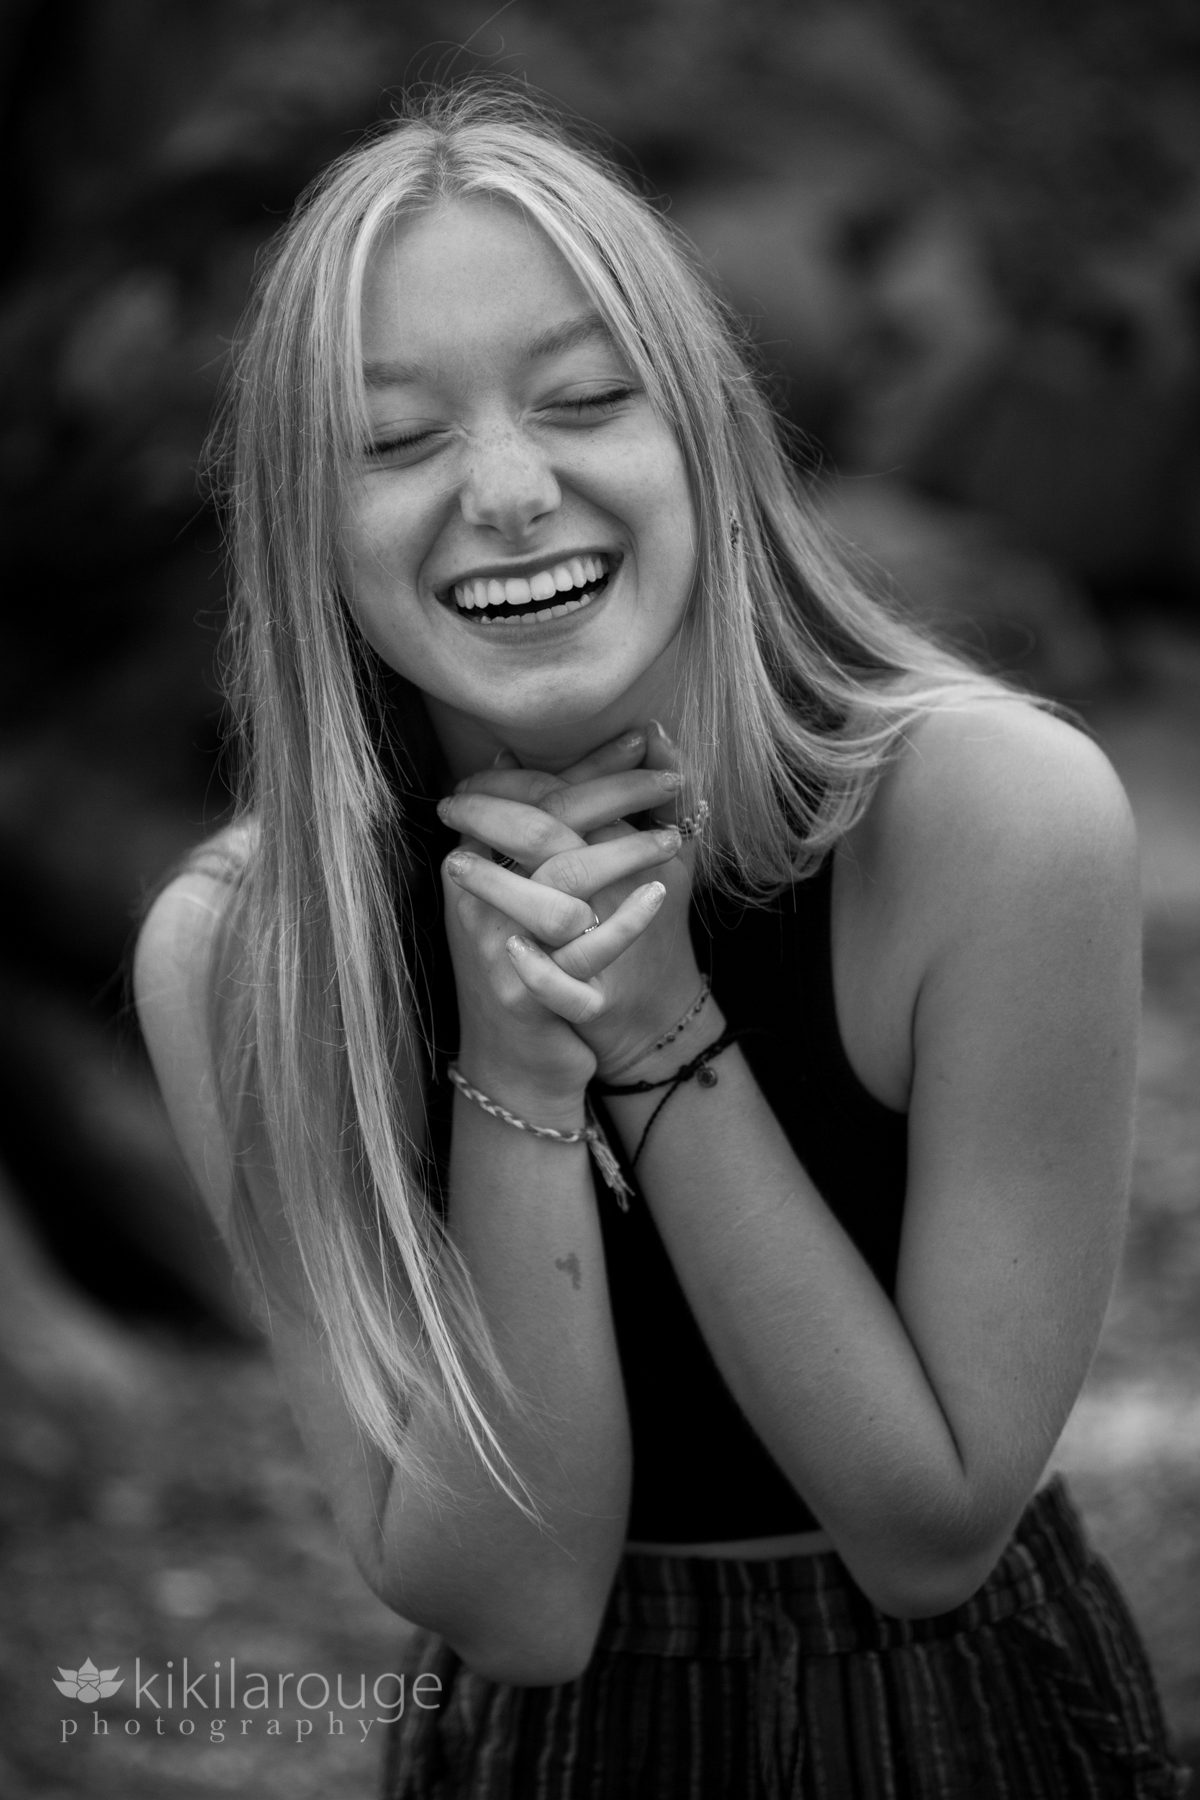 Blonde teen girl holding hands and laughing